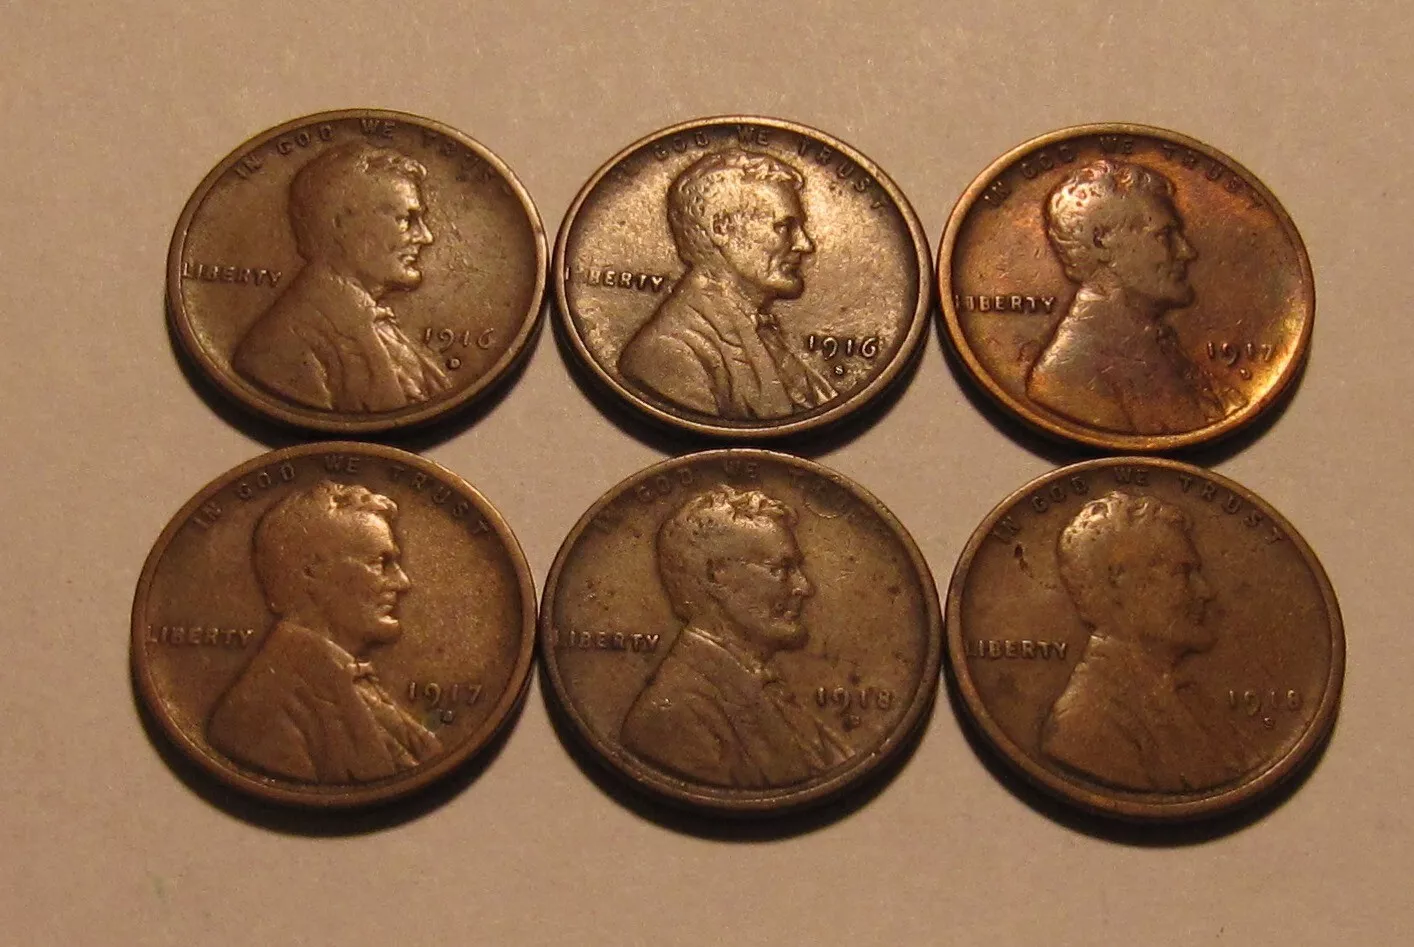 1916 DS 1917 DS 1918 DS Lincoln Cent Penny - Mixed Condition - 14SU - Image 1